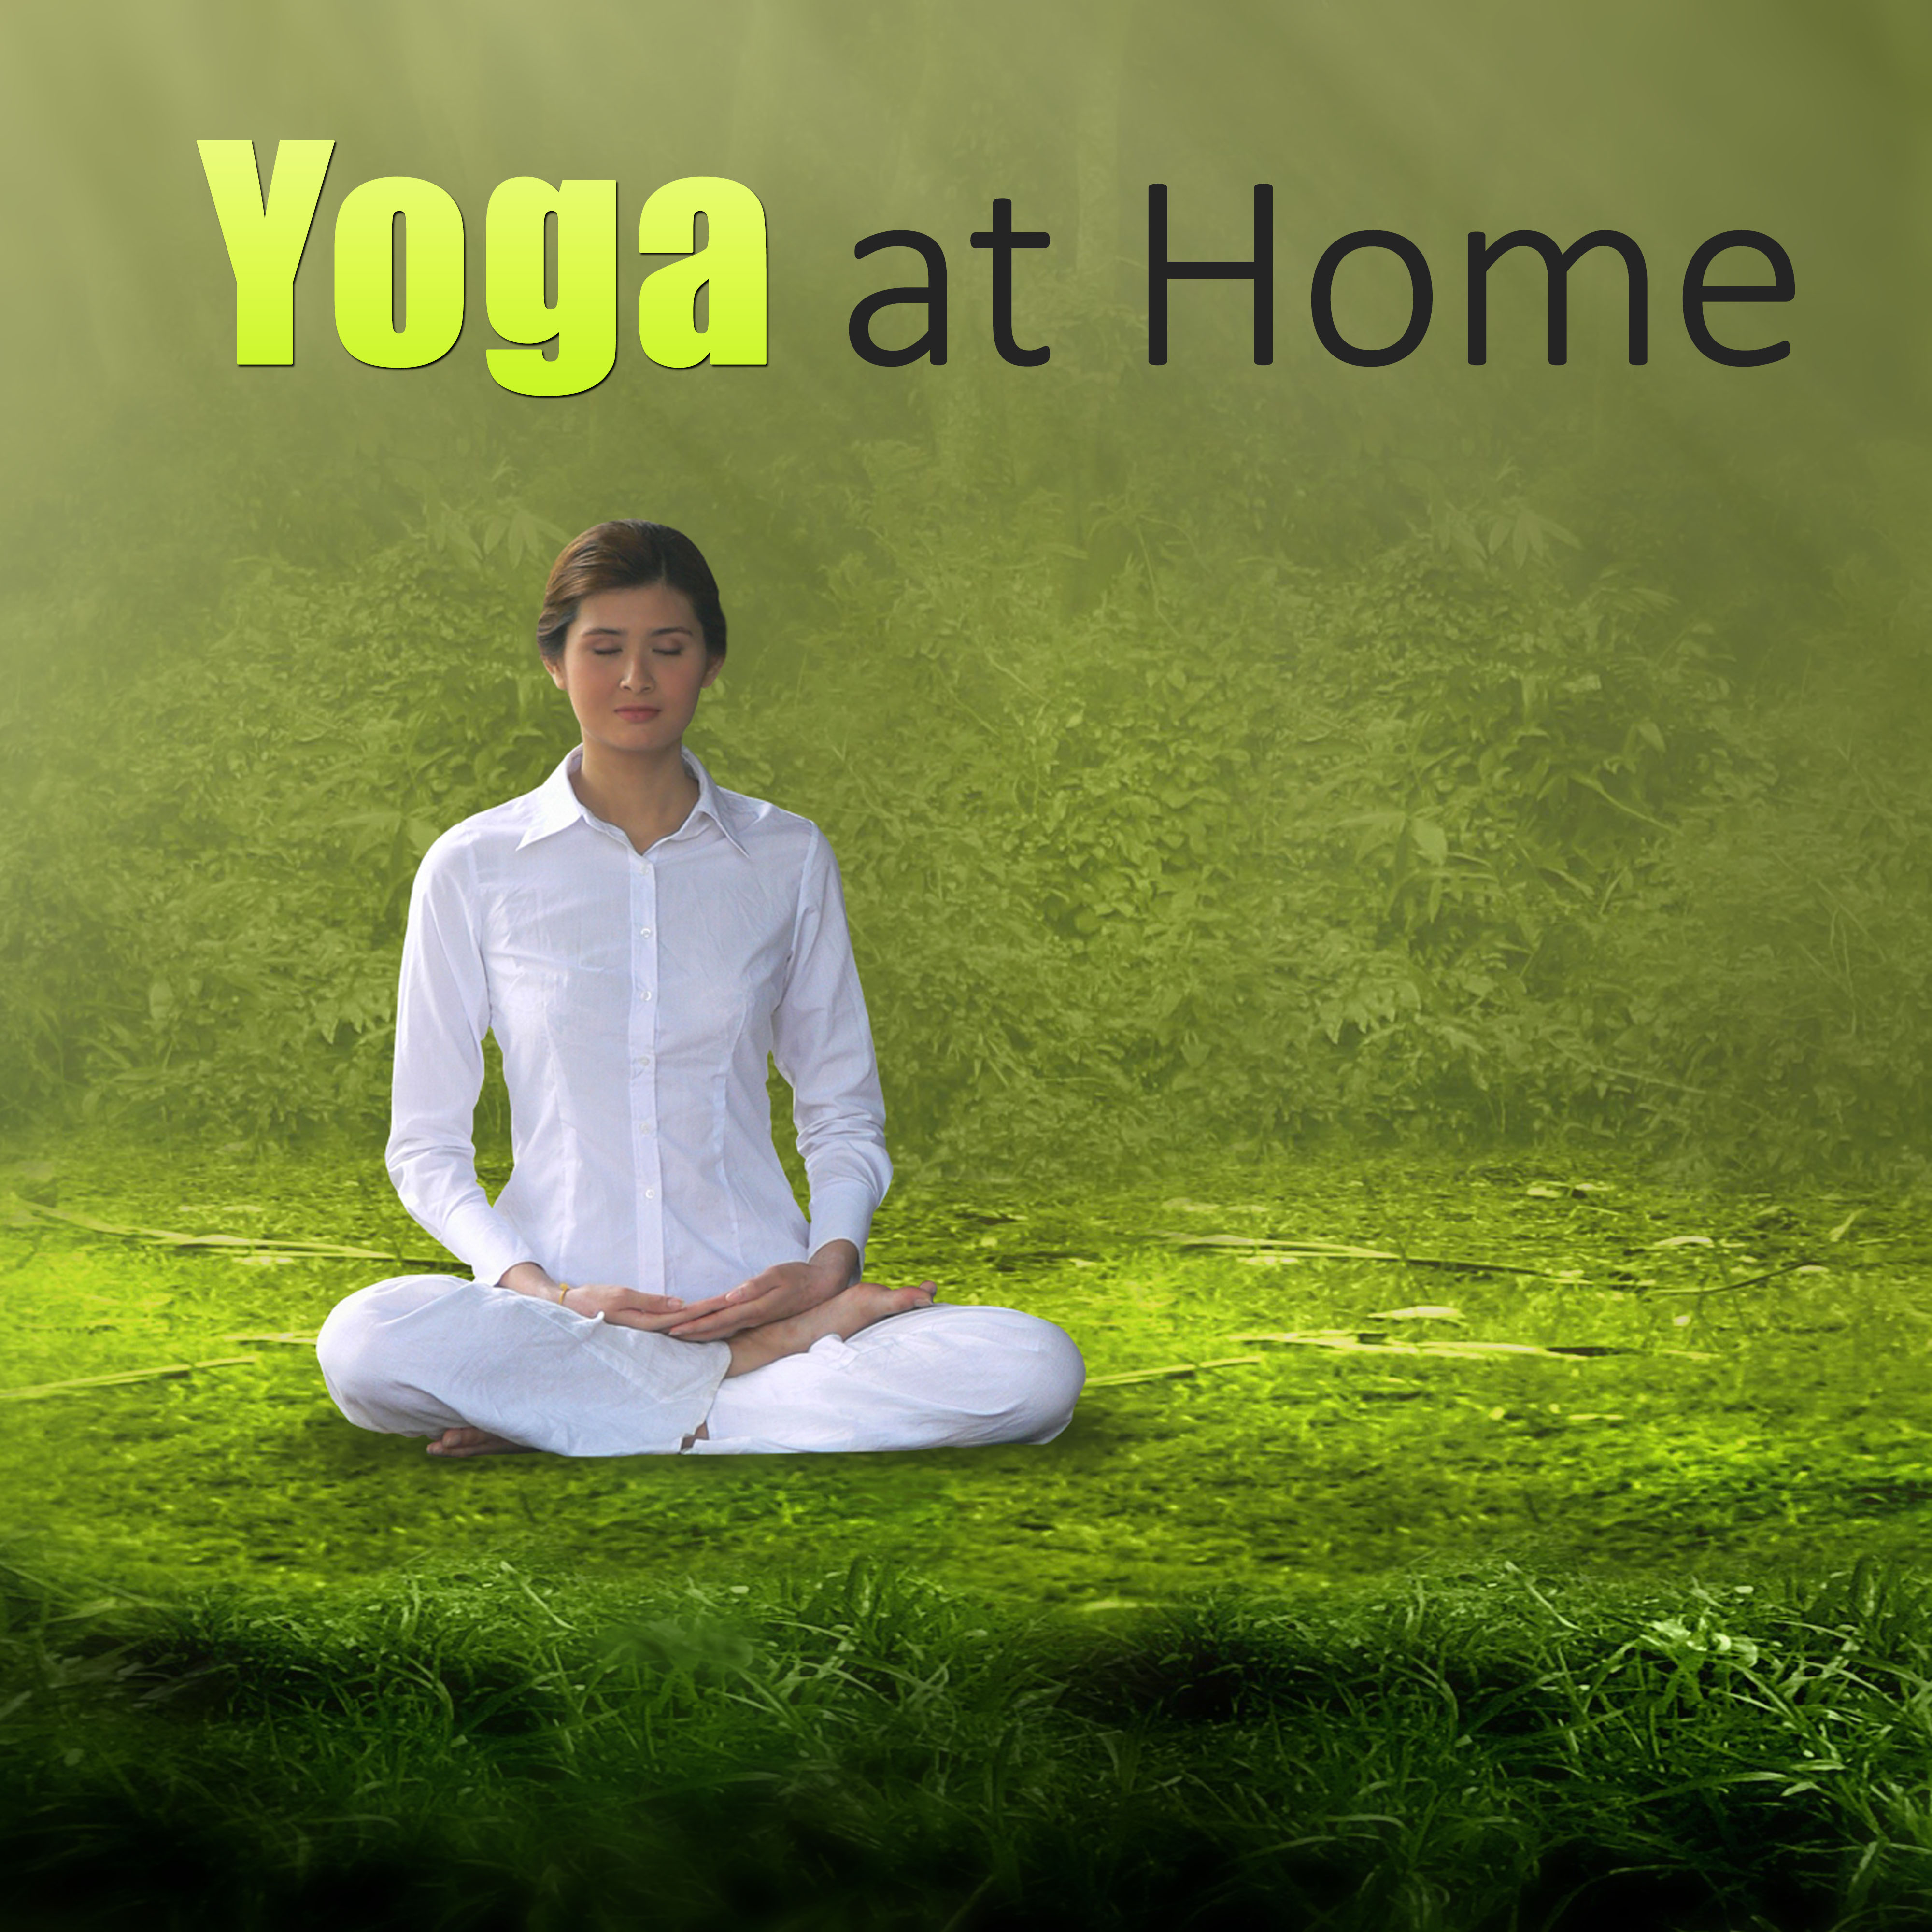 Yoga at Home  Relax with Yoga Music at Your Home, New Age Serene Music for Yoga Exercises  Meditation, Yoga for Development Inner Power, Pilates for Healthy Lifestyle